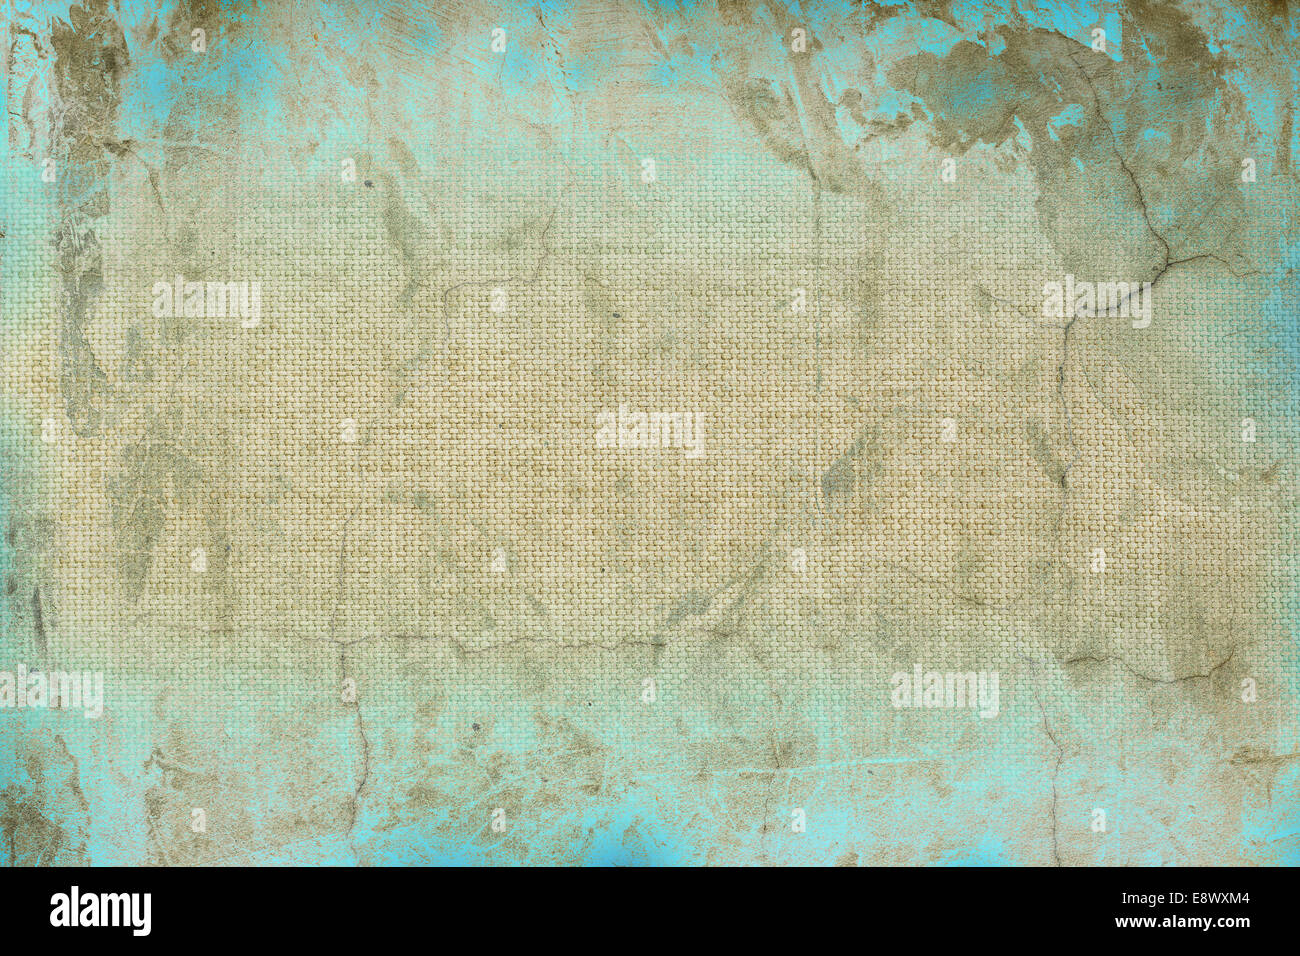 Abstract grunge background Banque D'Images